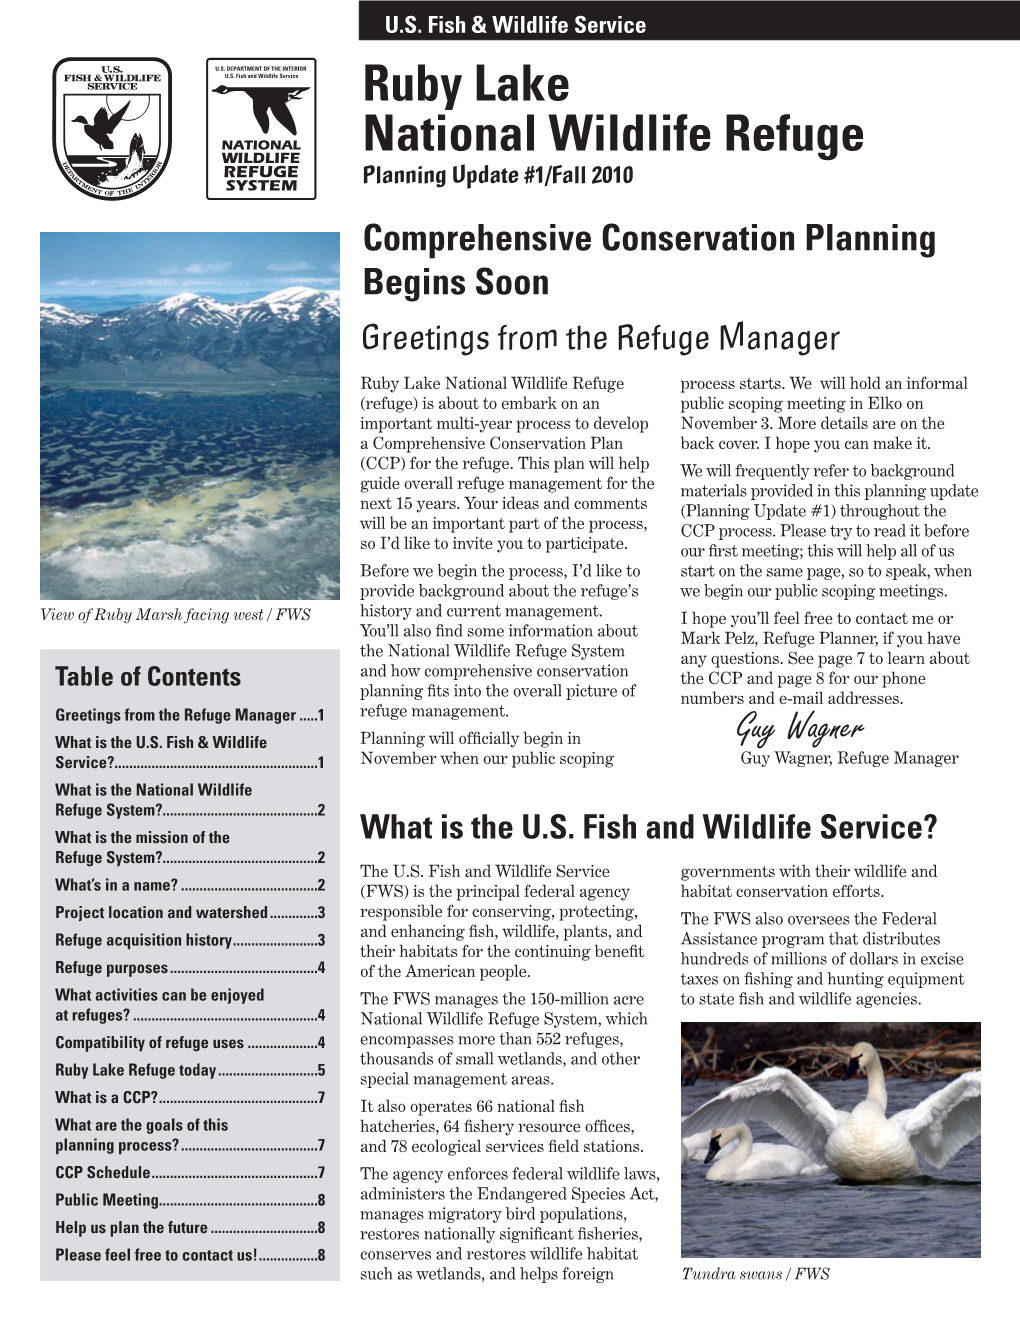 Ruby Lake National Wildlife Refuge Planning Update #1/Fall 2010 Comprehensive Conservation Planning Begins Soon Greetings from the Refuge Manager